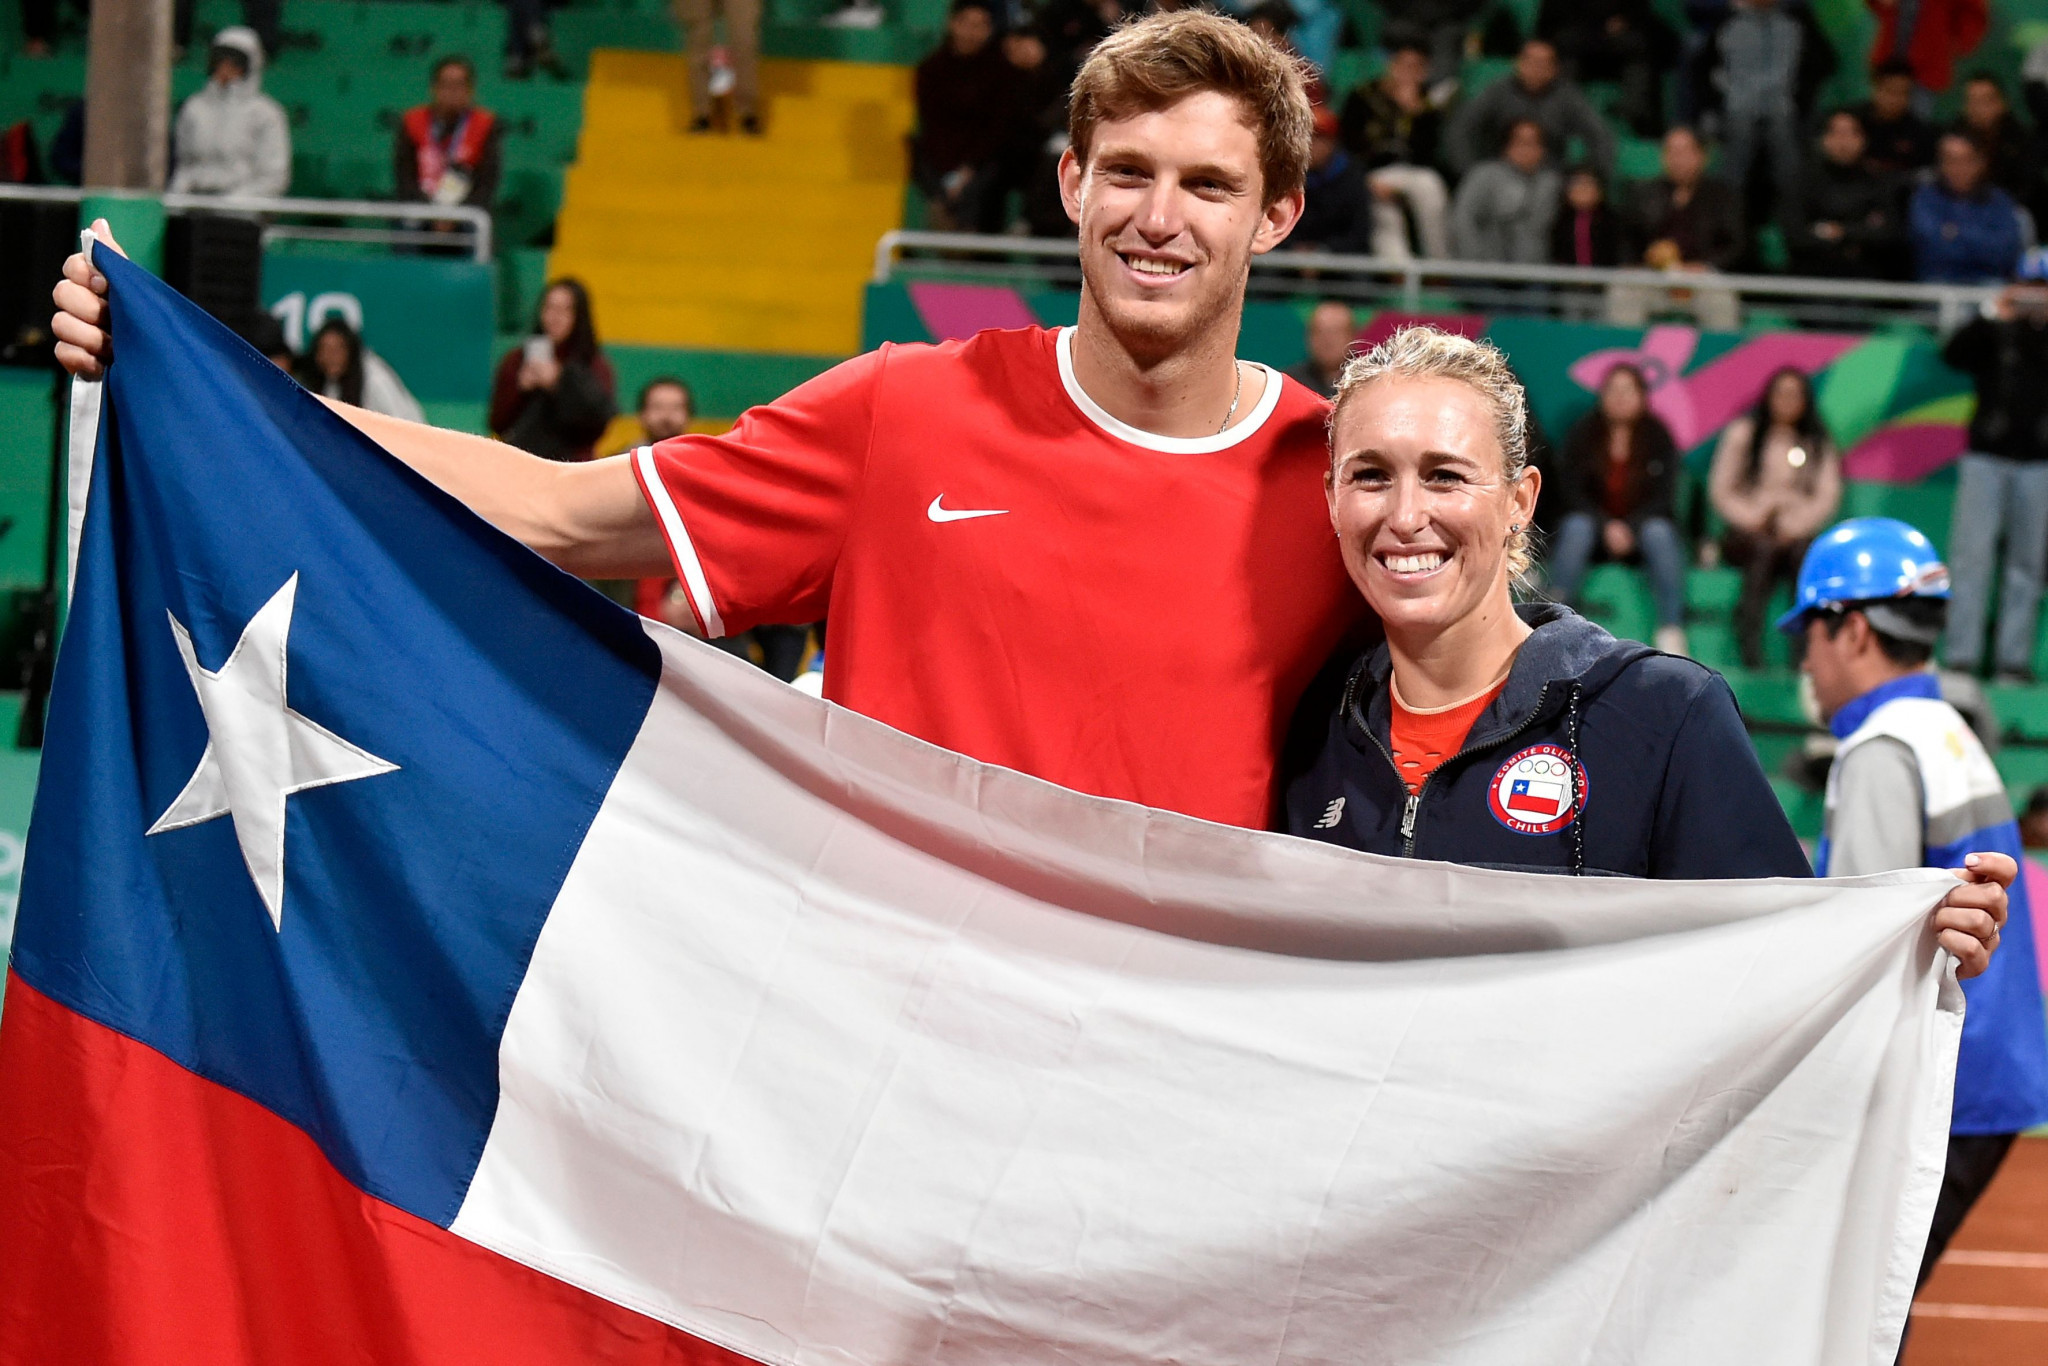 Chile won the mixed doubles tennis final ©Getty Images